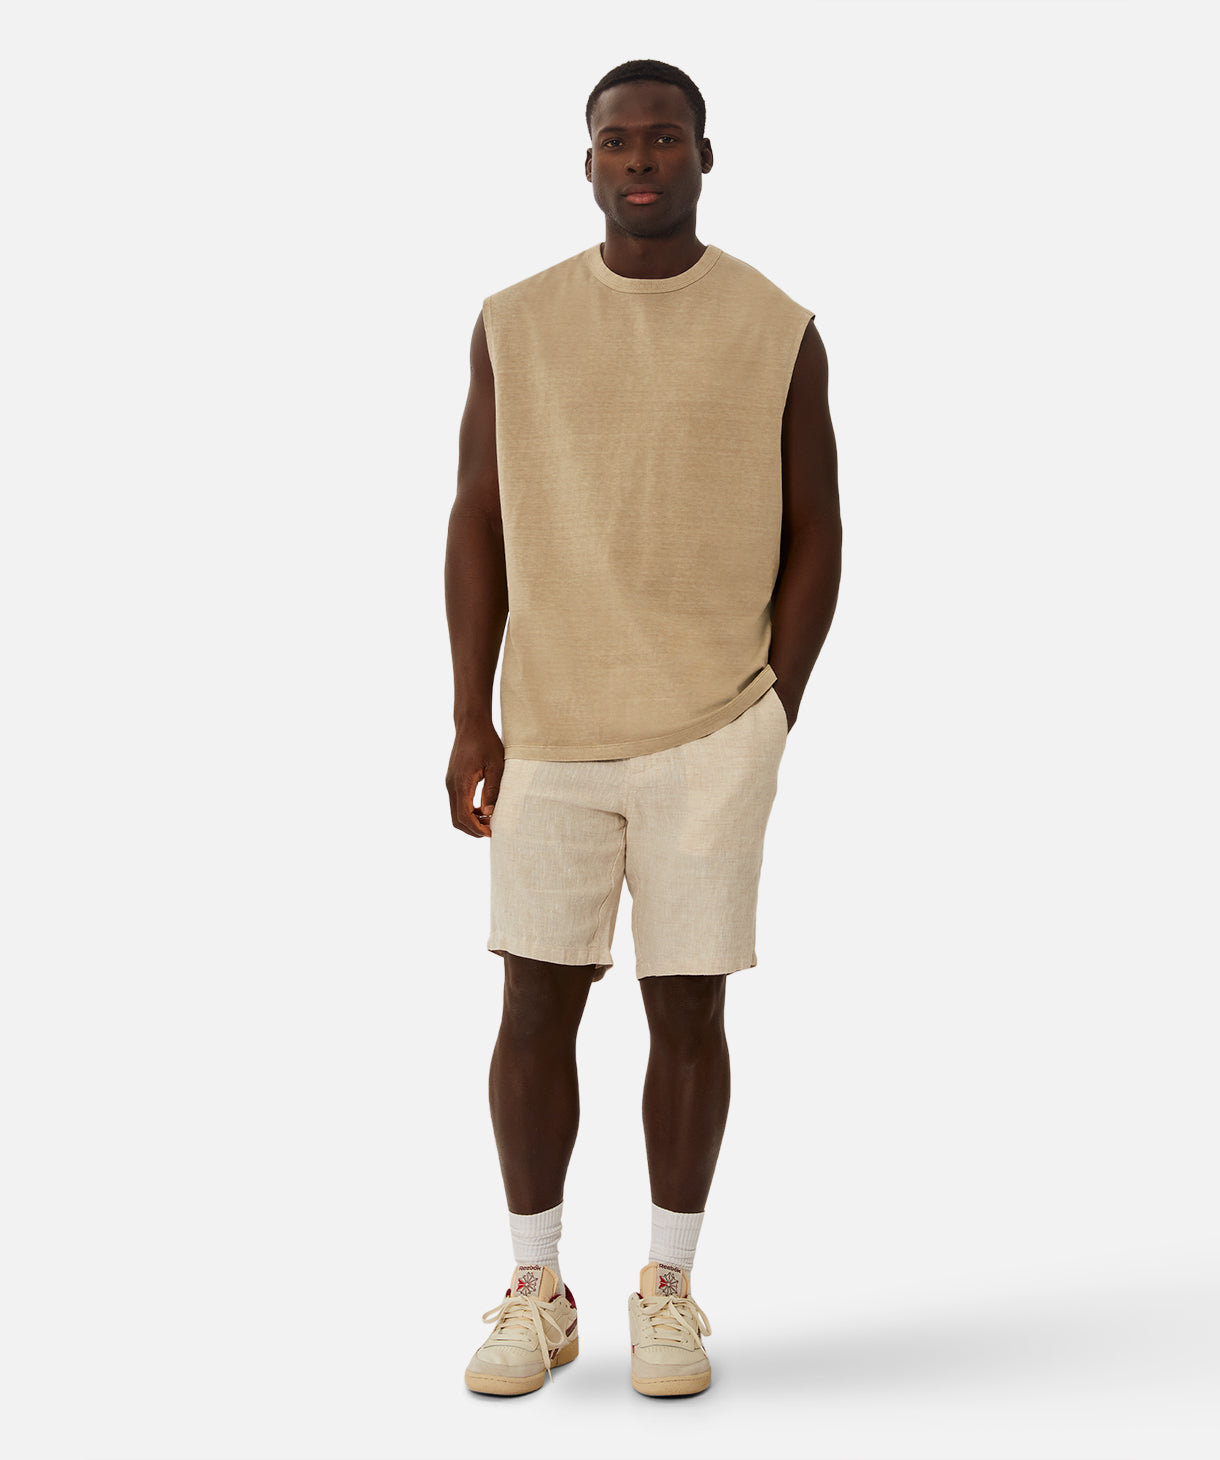 The Del Sur Sleeveless Tee - OD Wheat – Industrie Clothing Pty Ltd